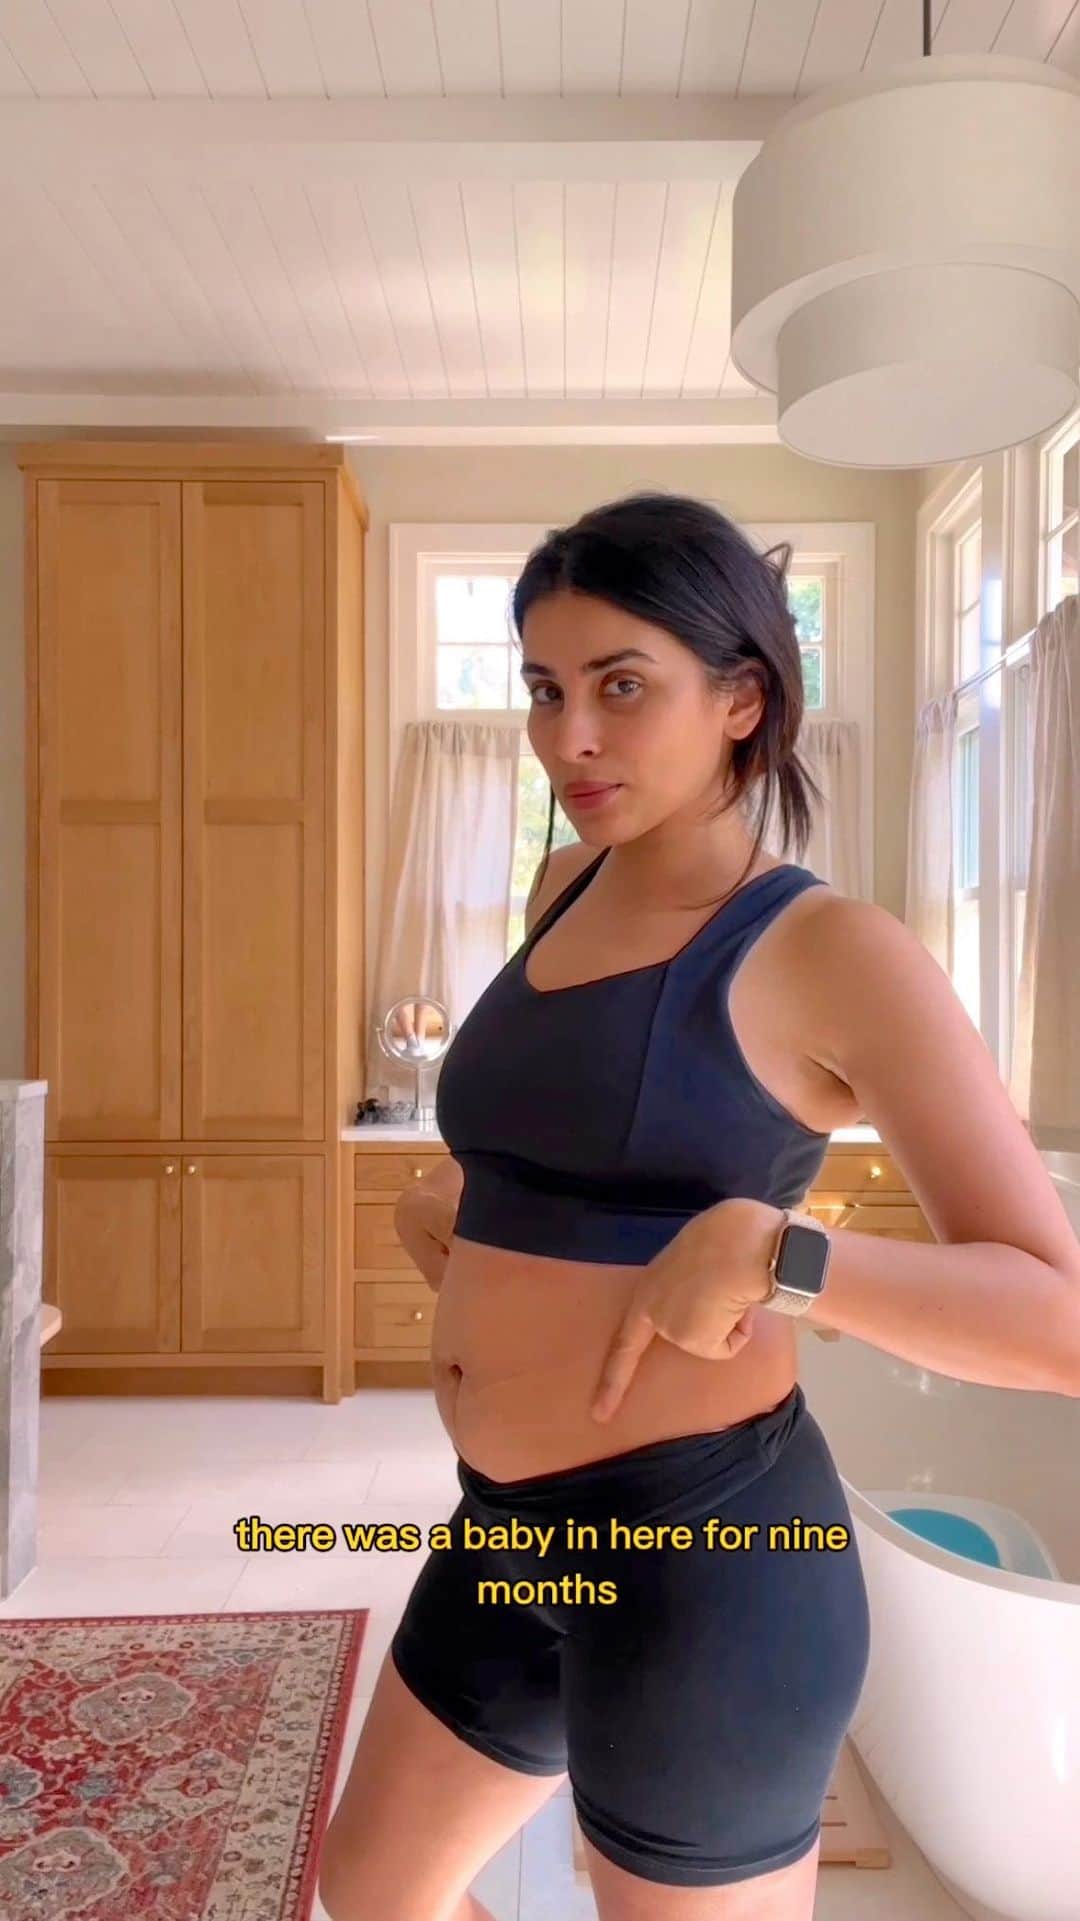 Sazan Hendrixのインスタグラム：「No time for calorie counting here! 🙃 #wwpartner Just being a mom of three alone fills up my brain with enough stuff to keep track of 😅 Getting back in shape in my postpartum era with a little extra support from WeightWatchers. I love that it’s given me the science-backed tools I need to feel empowered to lose the extra baby weight in a healthy, quick and easy way. Gaining a new confidence and energy that’s here to stay. P.S. This was documented 2 months ago and I’m so excited to share more updates soon. Have any of you tried @ww? ☺️💪🏼💕   Tap the link in my bio if you want to join me in the WW’s program. Use code SAZAN10 for $10 off your membership! *With select plan purch. Restr. apply. Offer ends 12/31 #PostpartumJourney #WeightWatchersForMe」